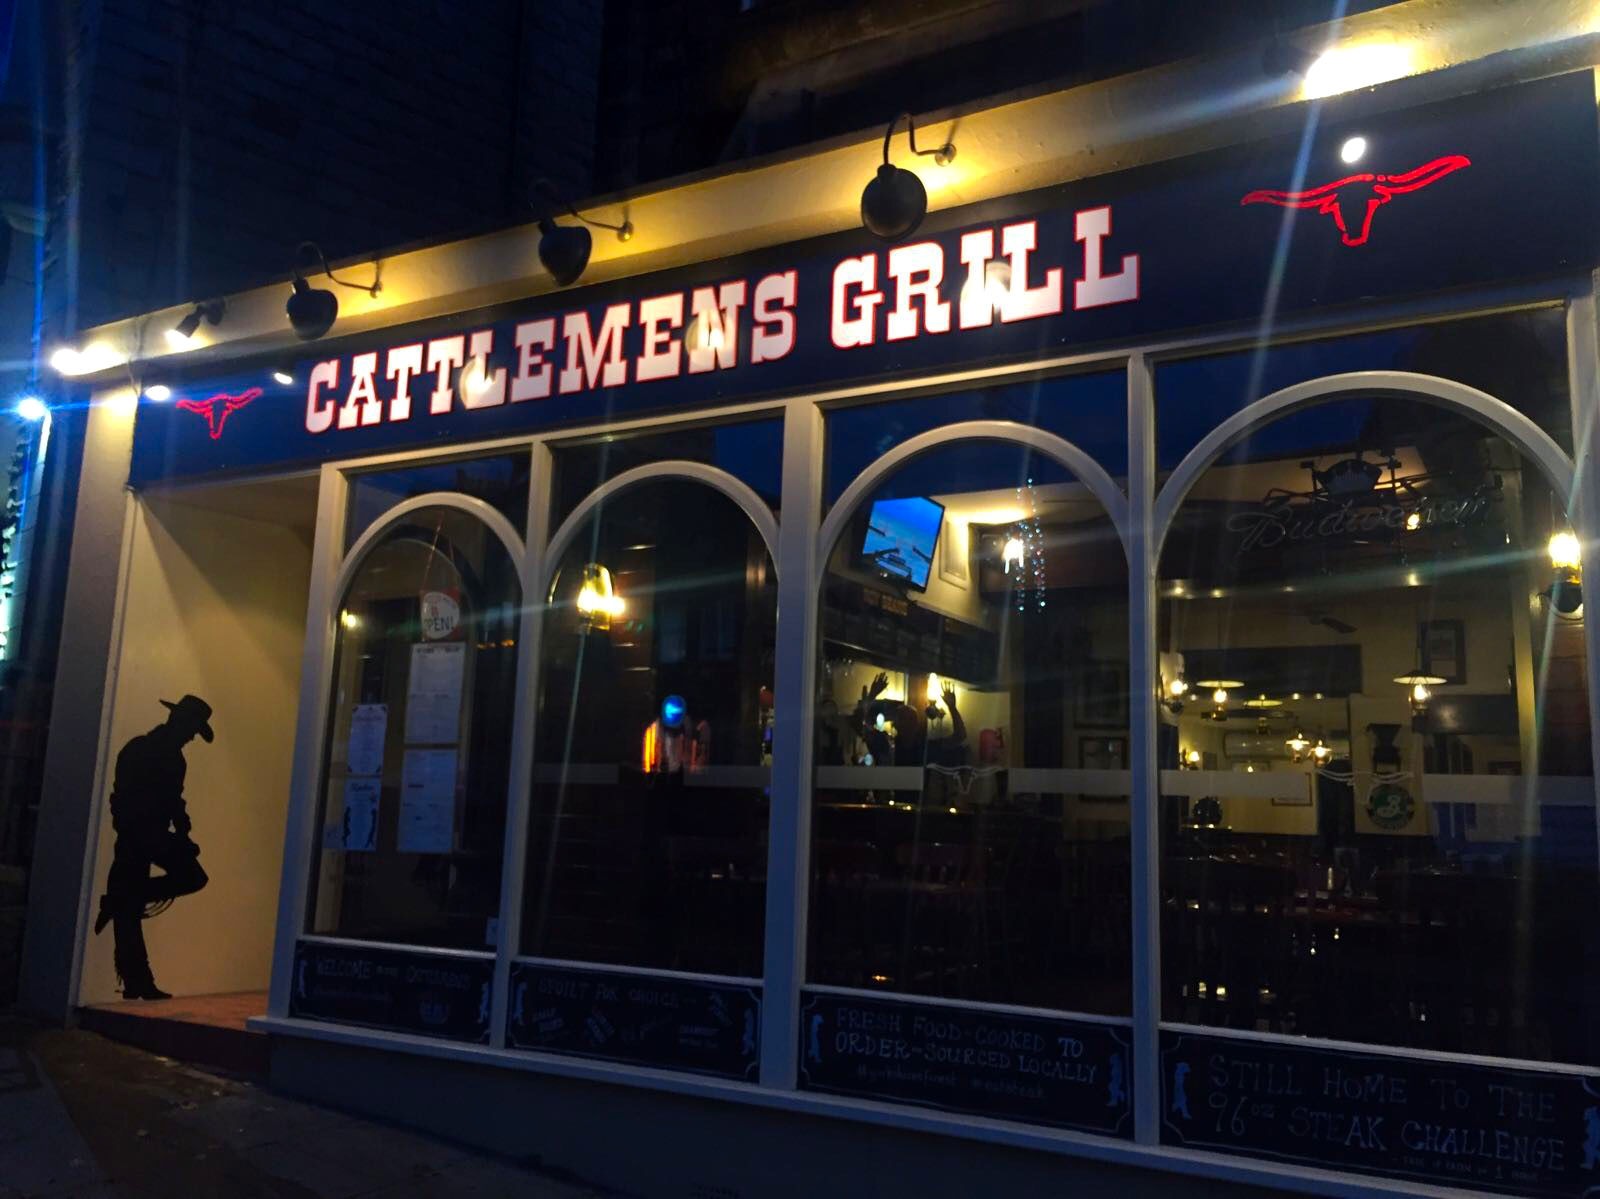 Cattlemens Grill is a steakhouse